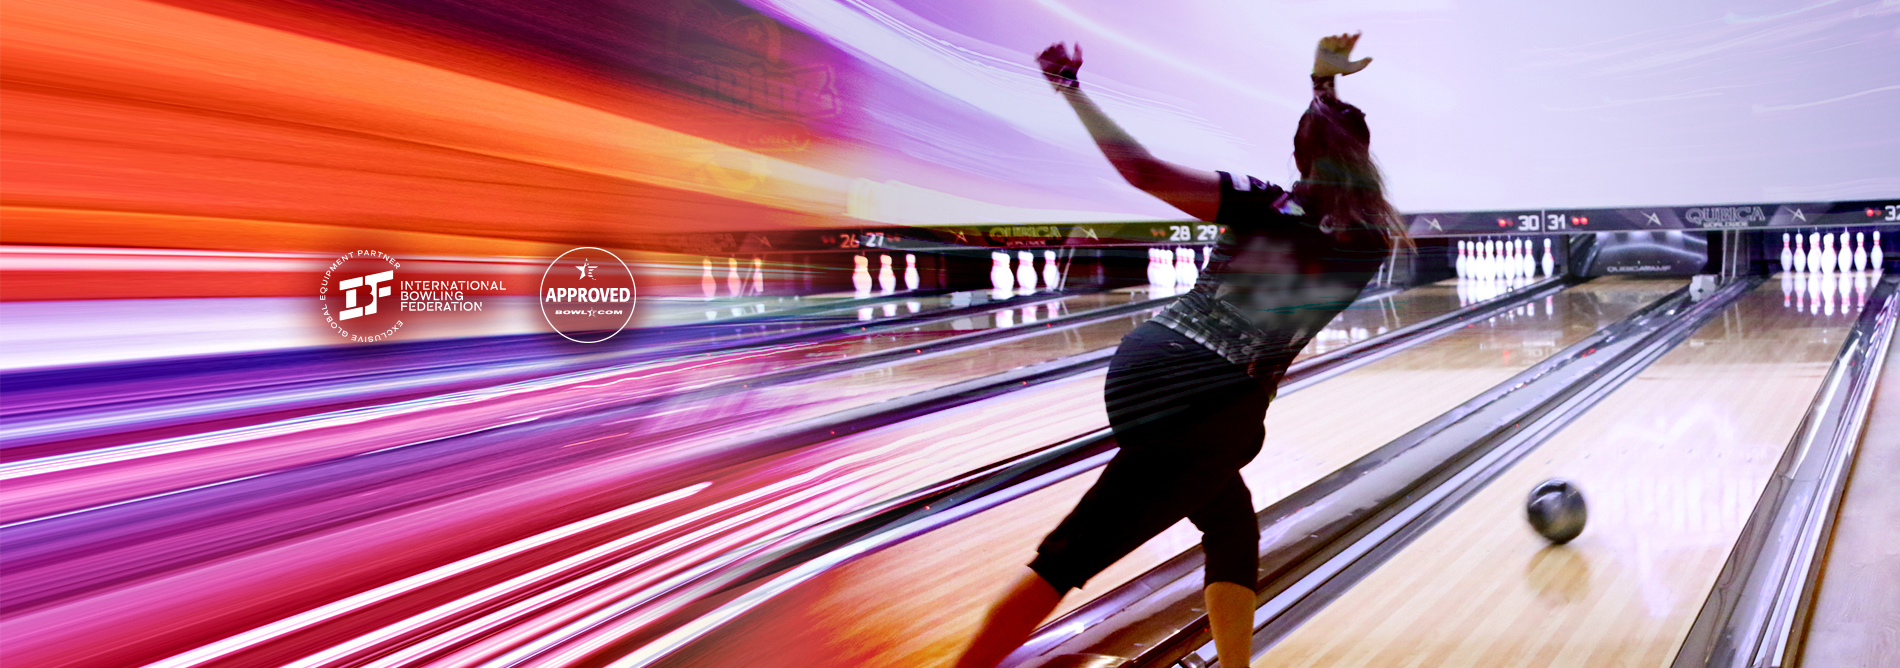 Bowling-QubicaAMF-great-for-the-sport-banner.jpg